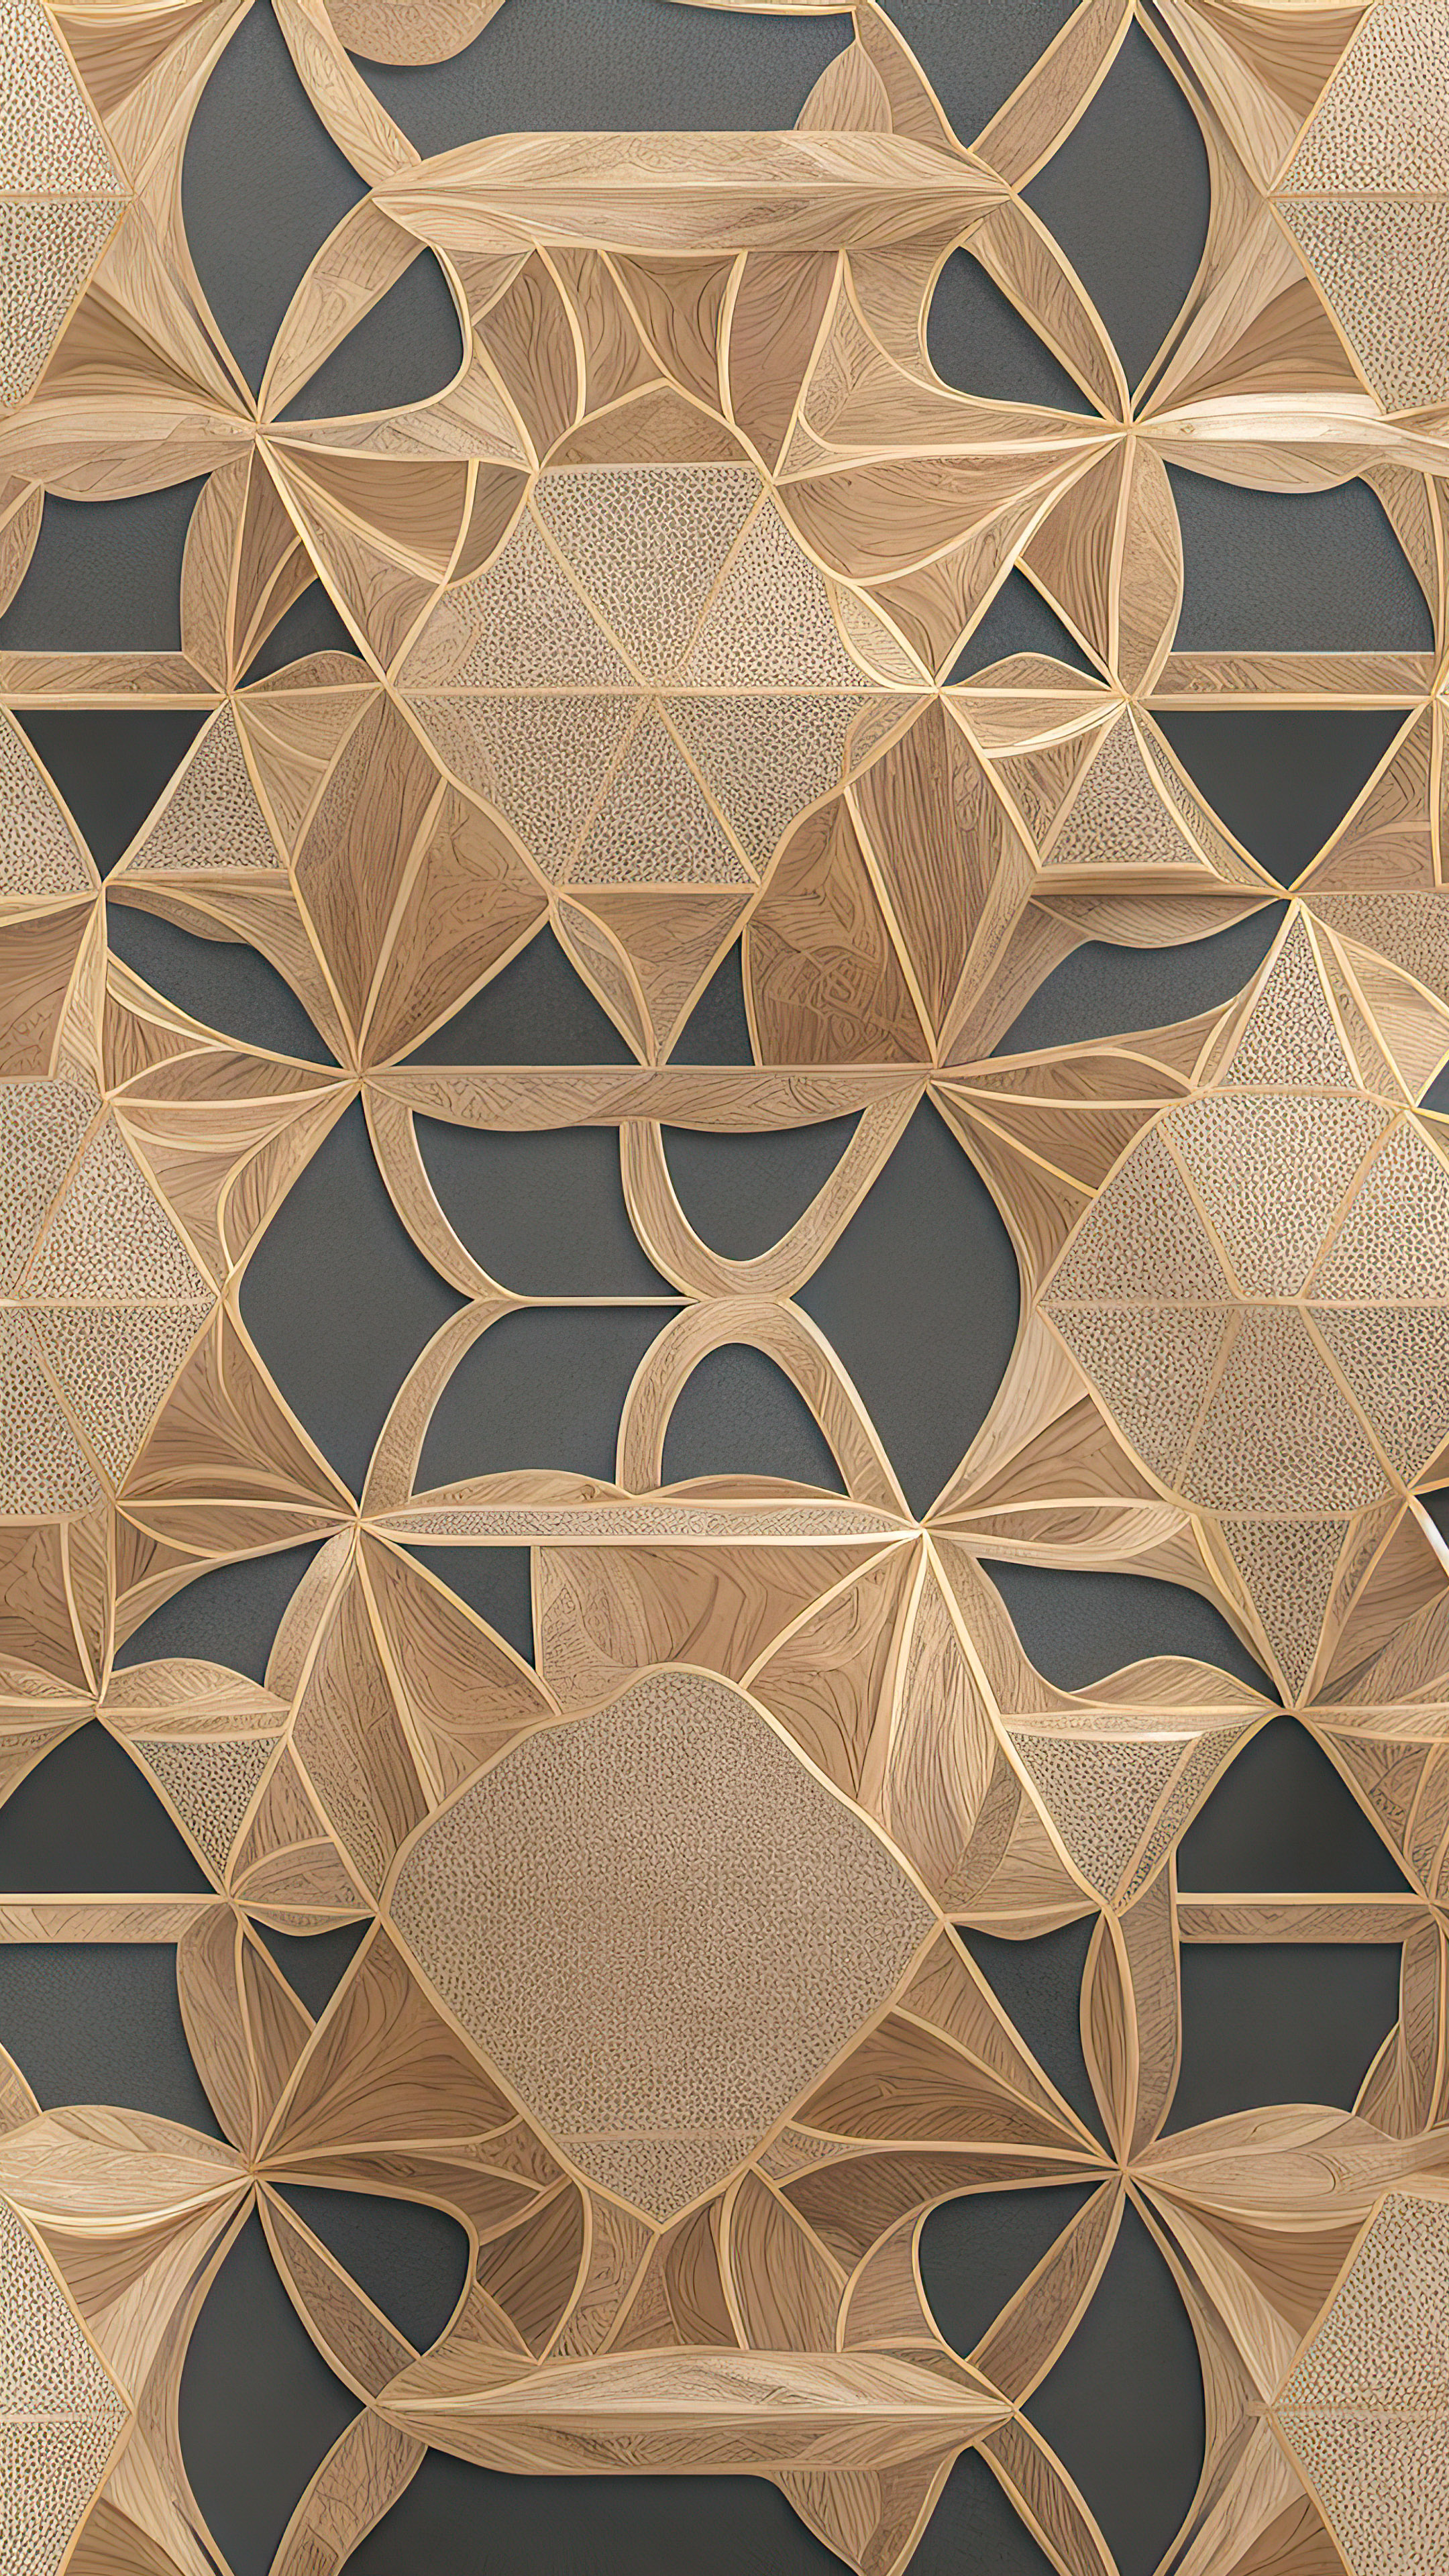 Indulge in the visual allure of symmetry with our abstract iPhone cool wallpapers, featuring mirrored elements.